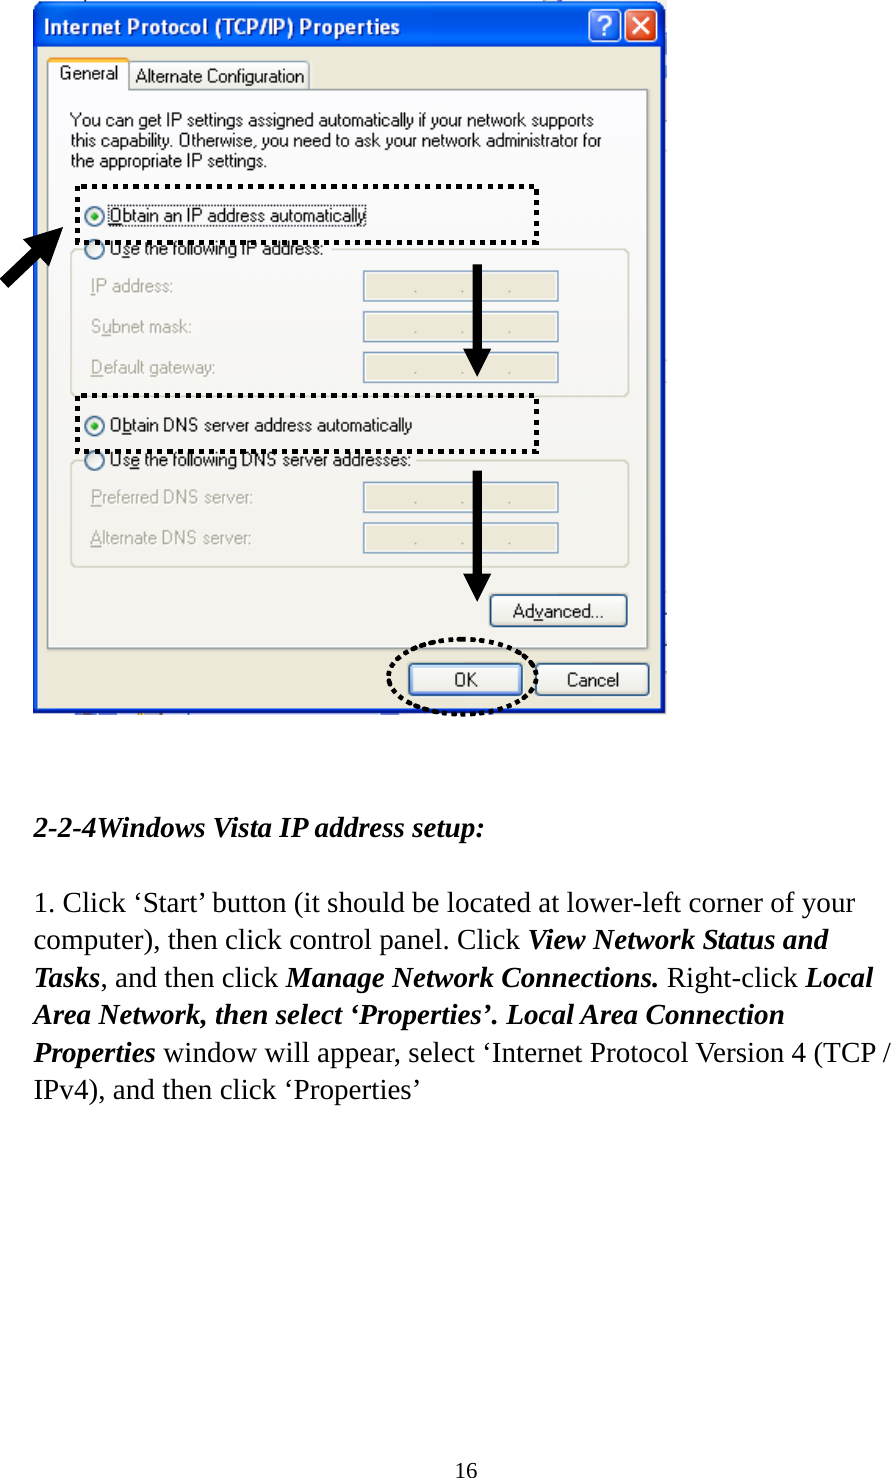 16    2-2-4Windows Vista IP address setup:  1. Click ‘Start’ button (it should be located at lower-left corner of your computer), then click control panel. Click View Network Status and Tasks, and then click Manage Network Connections. Right-click Local Area Network, then select ‘Properties’. Local Area Connection Properties window will appear, select ‘Internet Protocol Version 4 (TCP / IPv4), and then click ‘Properties’  